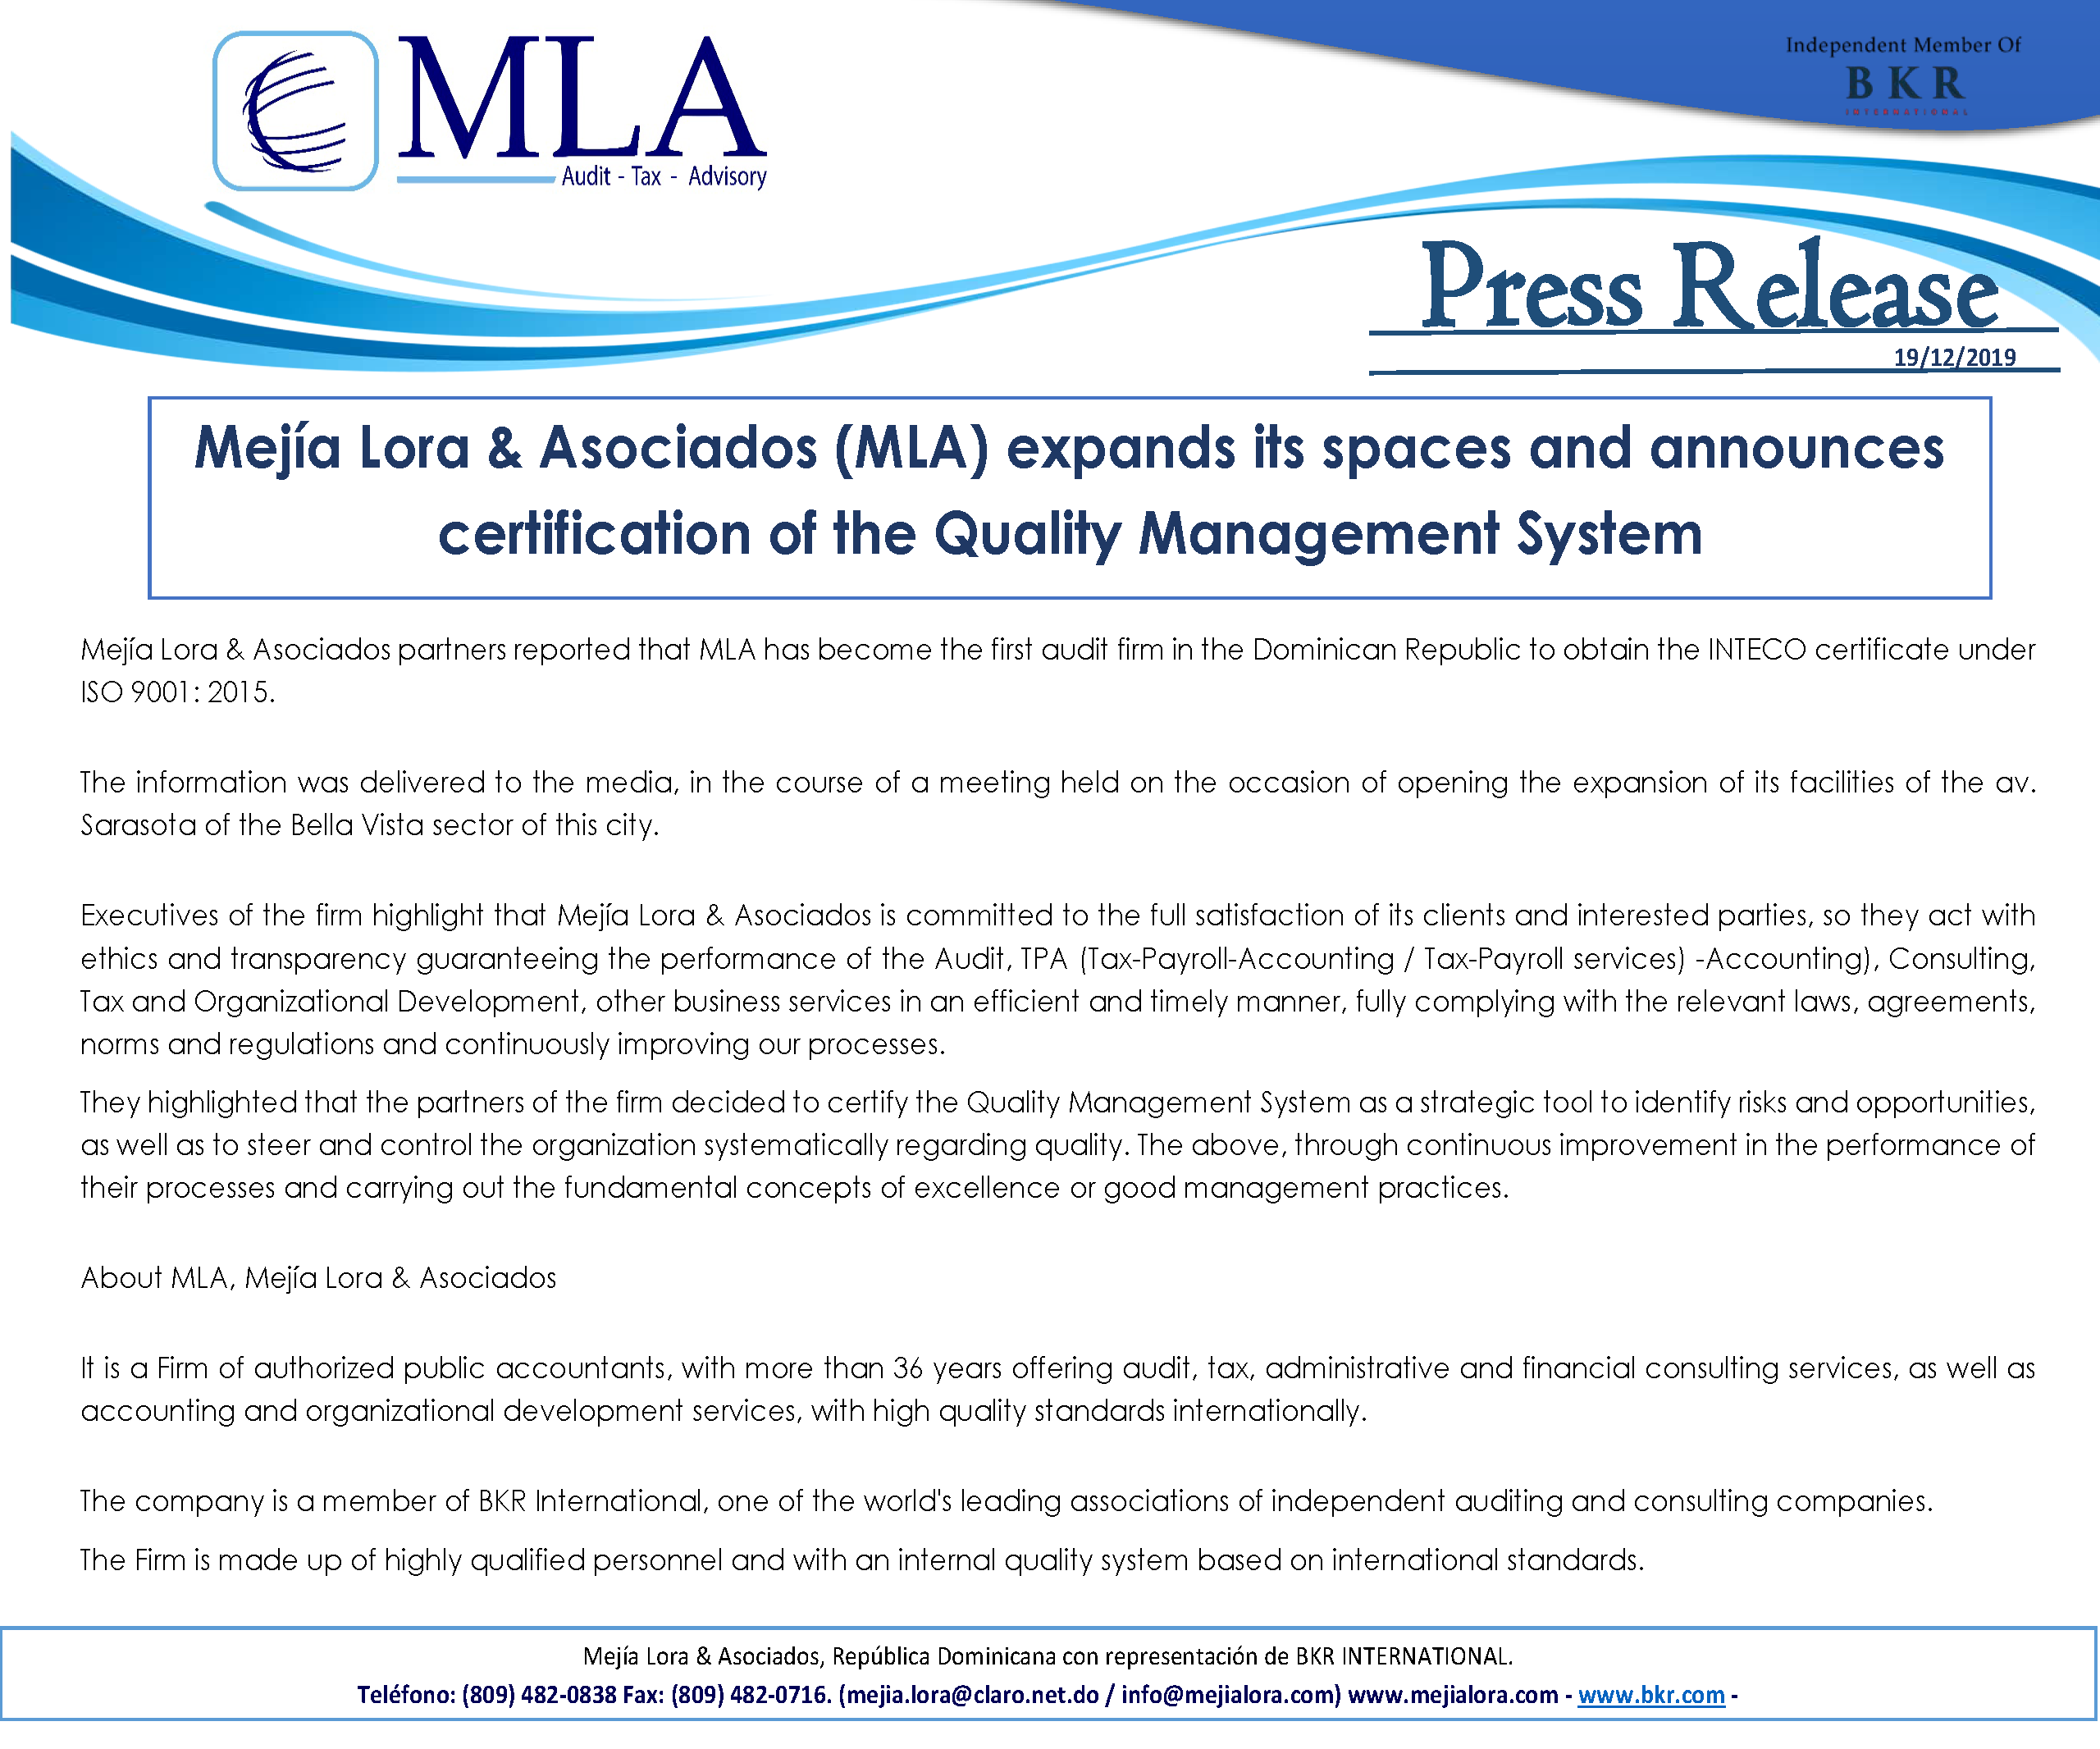 Mejía Lora & Asociados (MLA) expands its spaces and announces certification of the Quality Management System